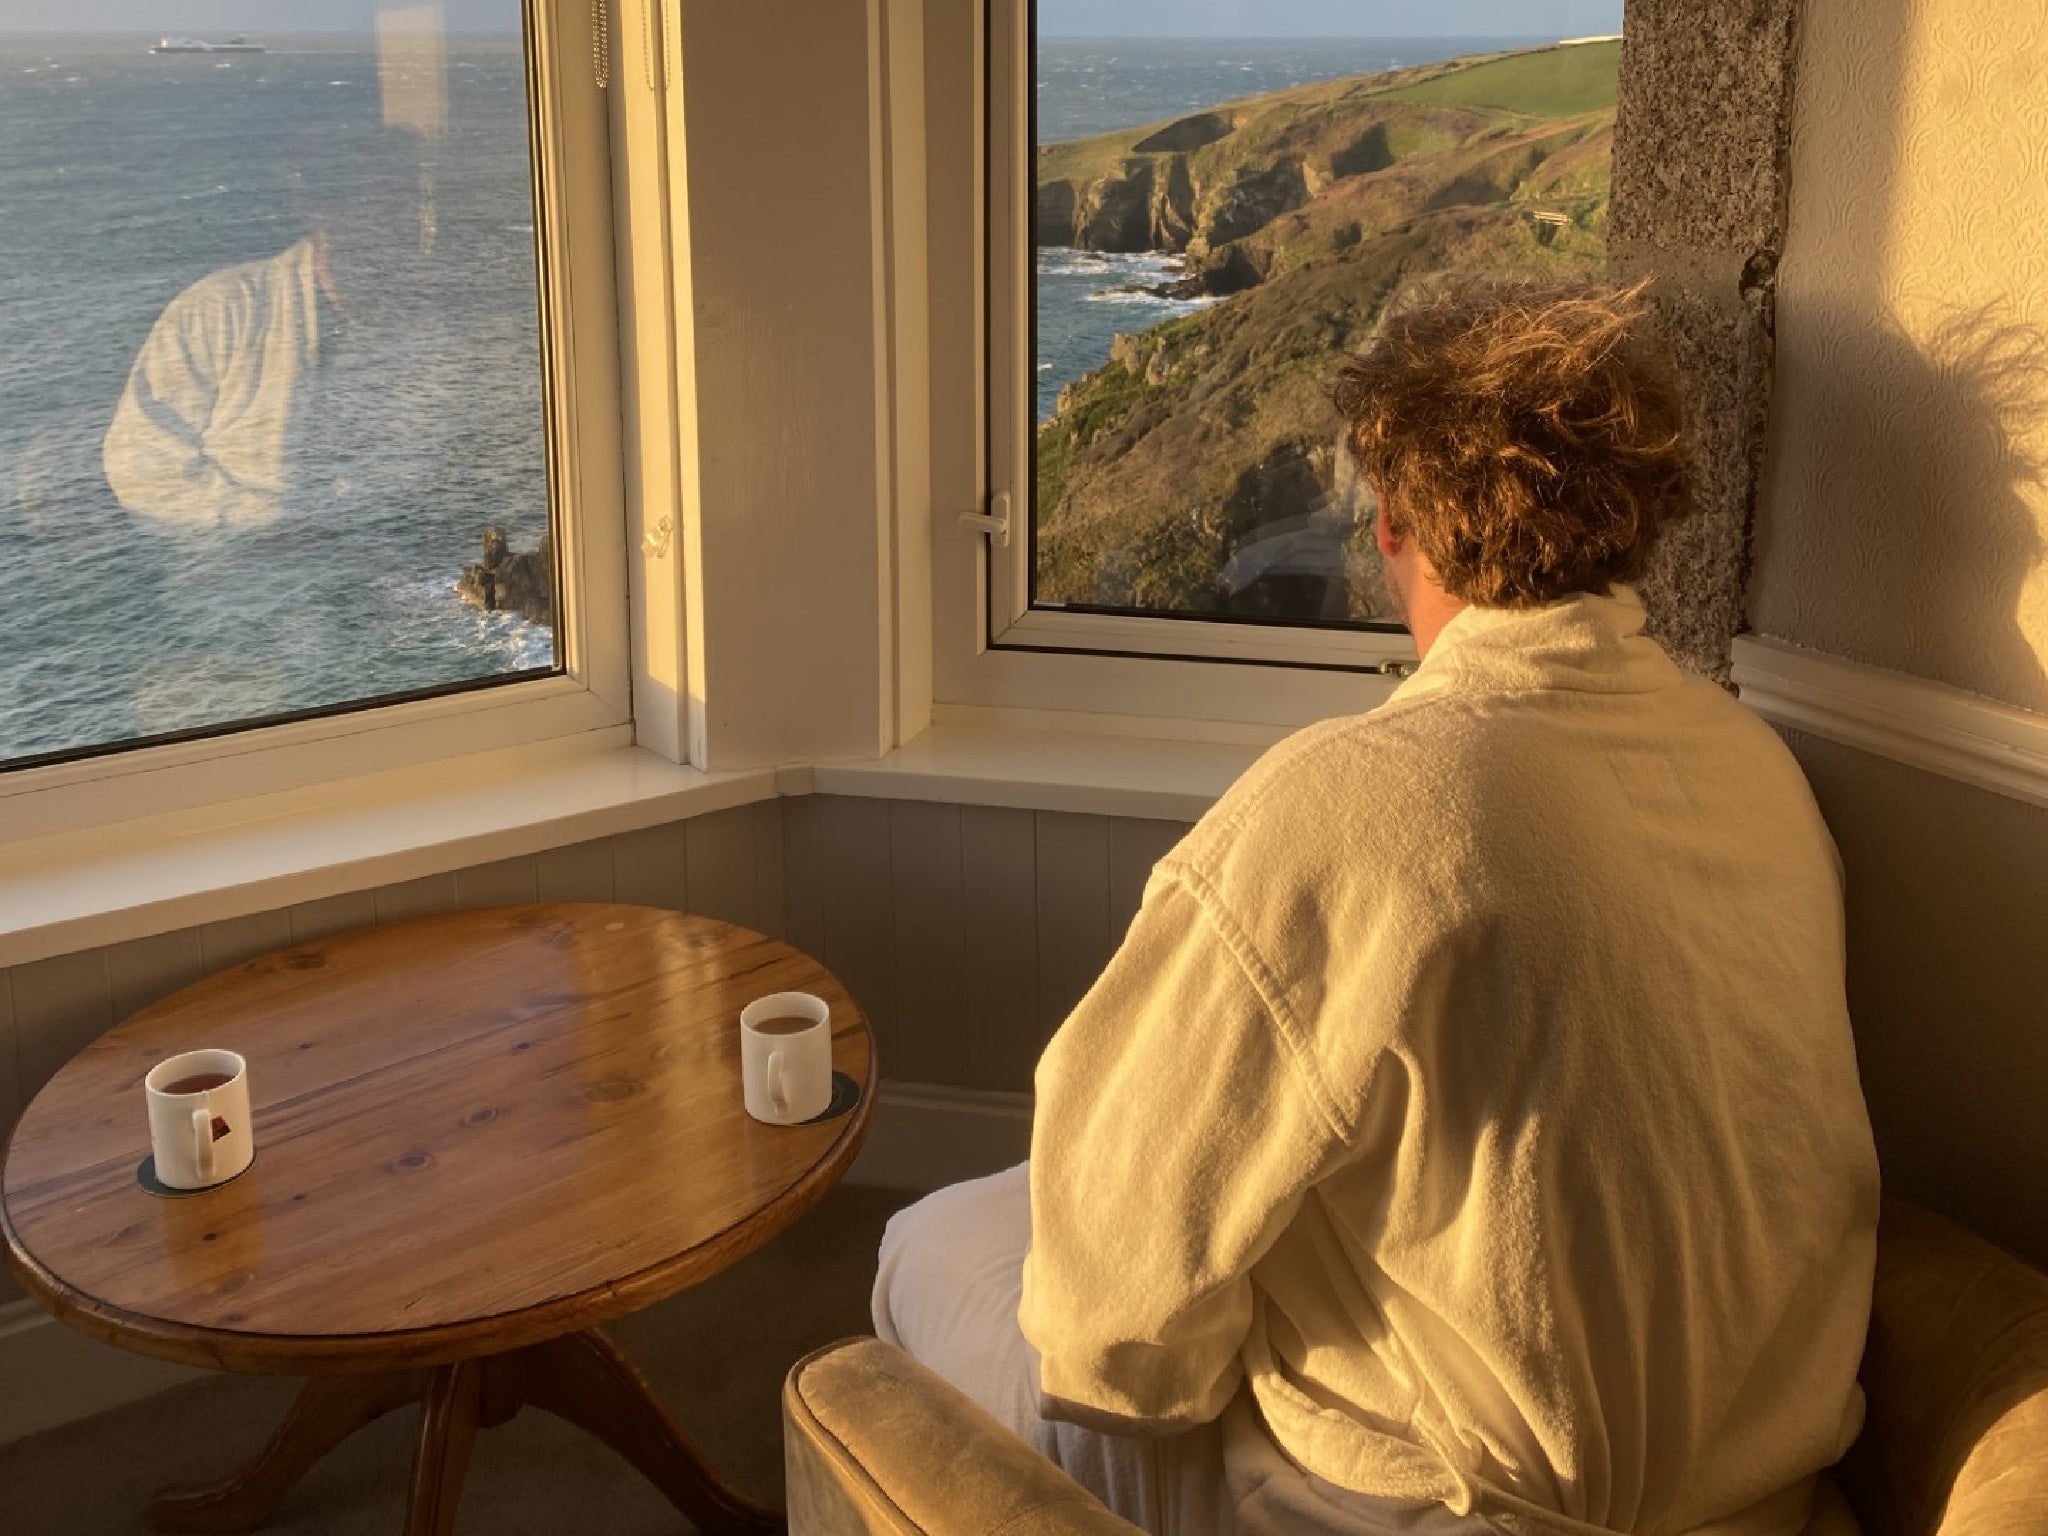 Housel Bay Hotel offers supreme panoramas of the Atlantic